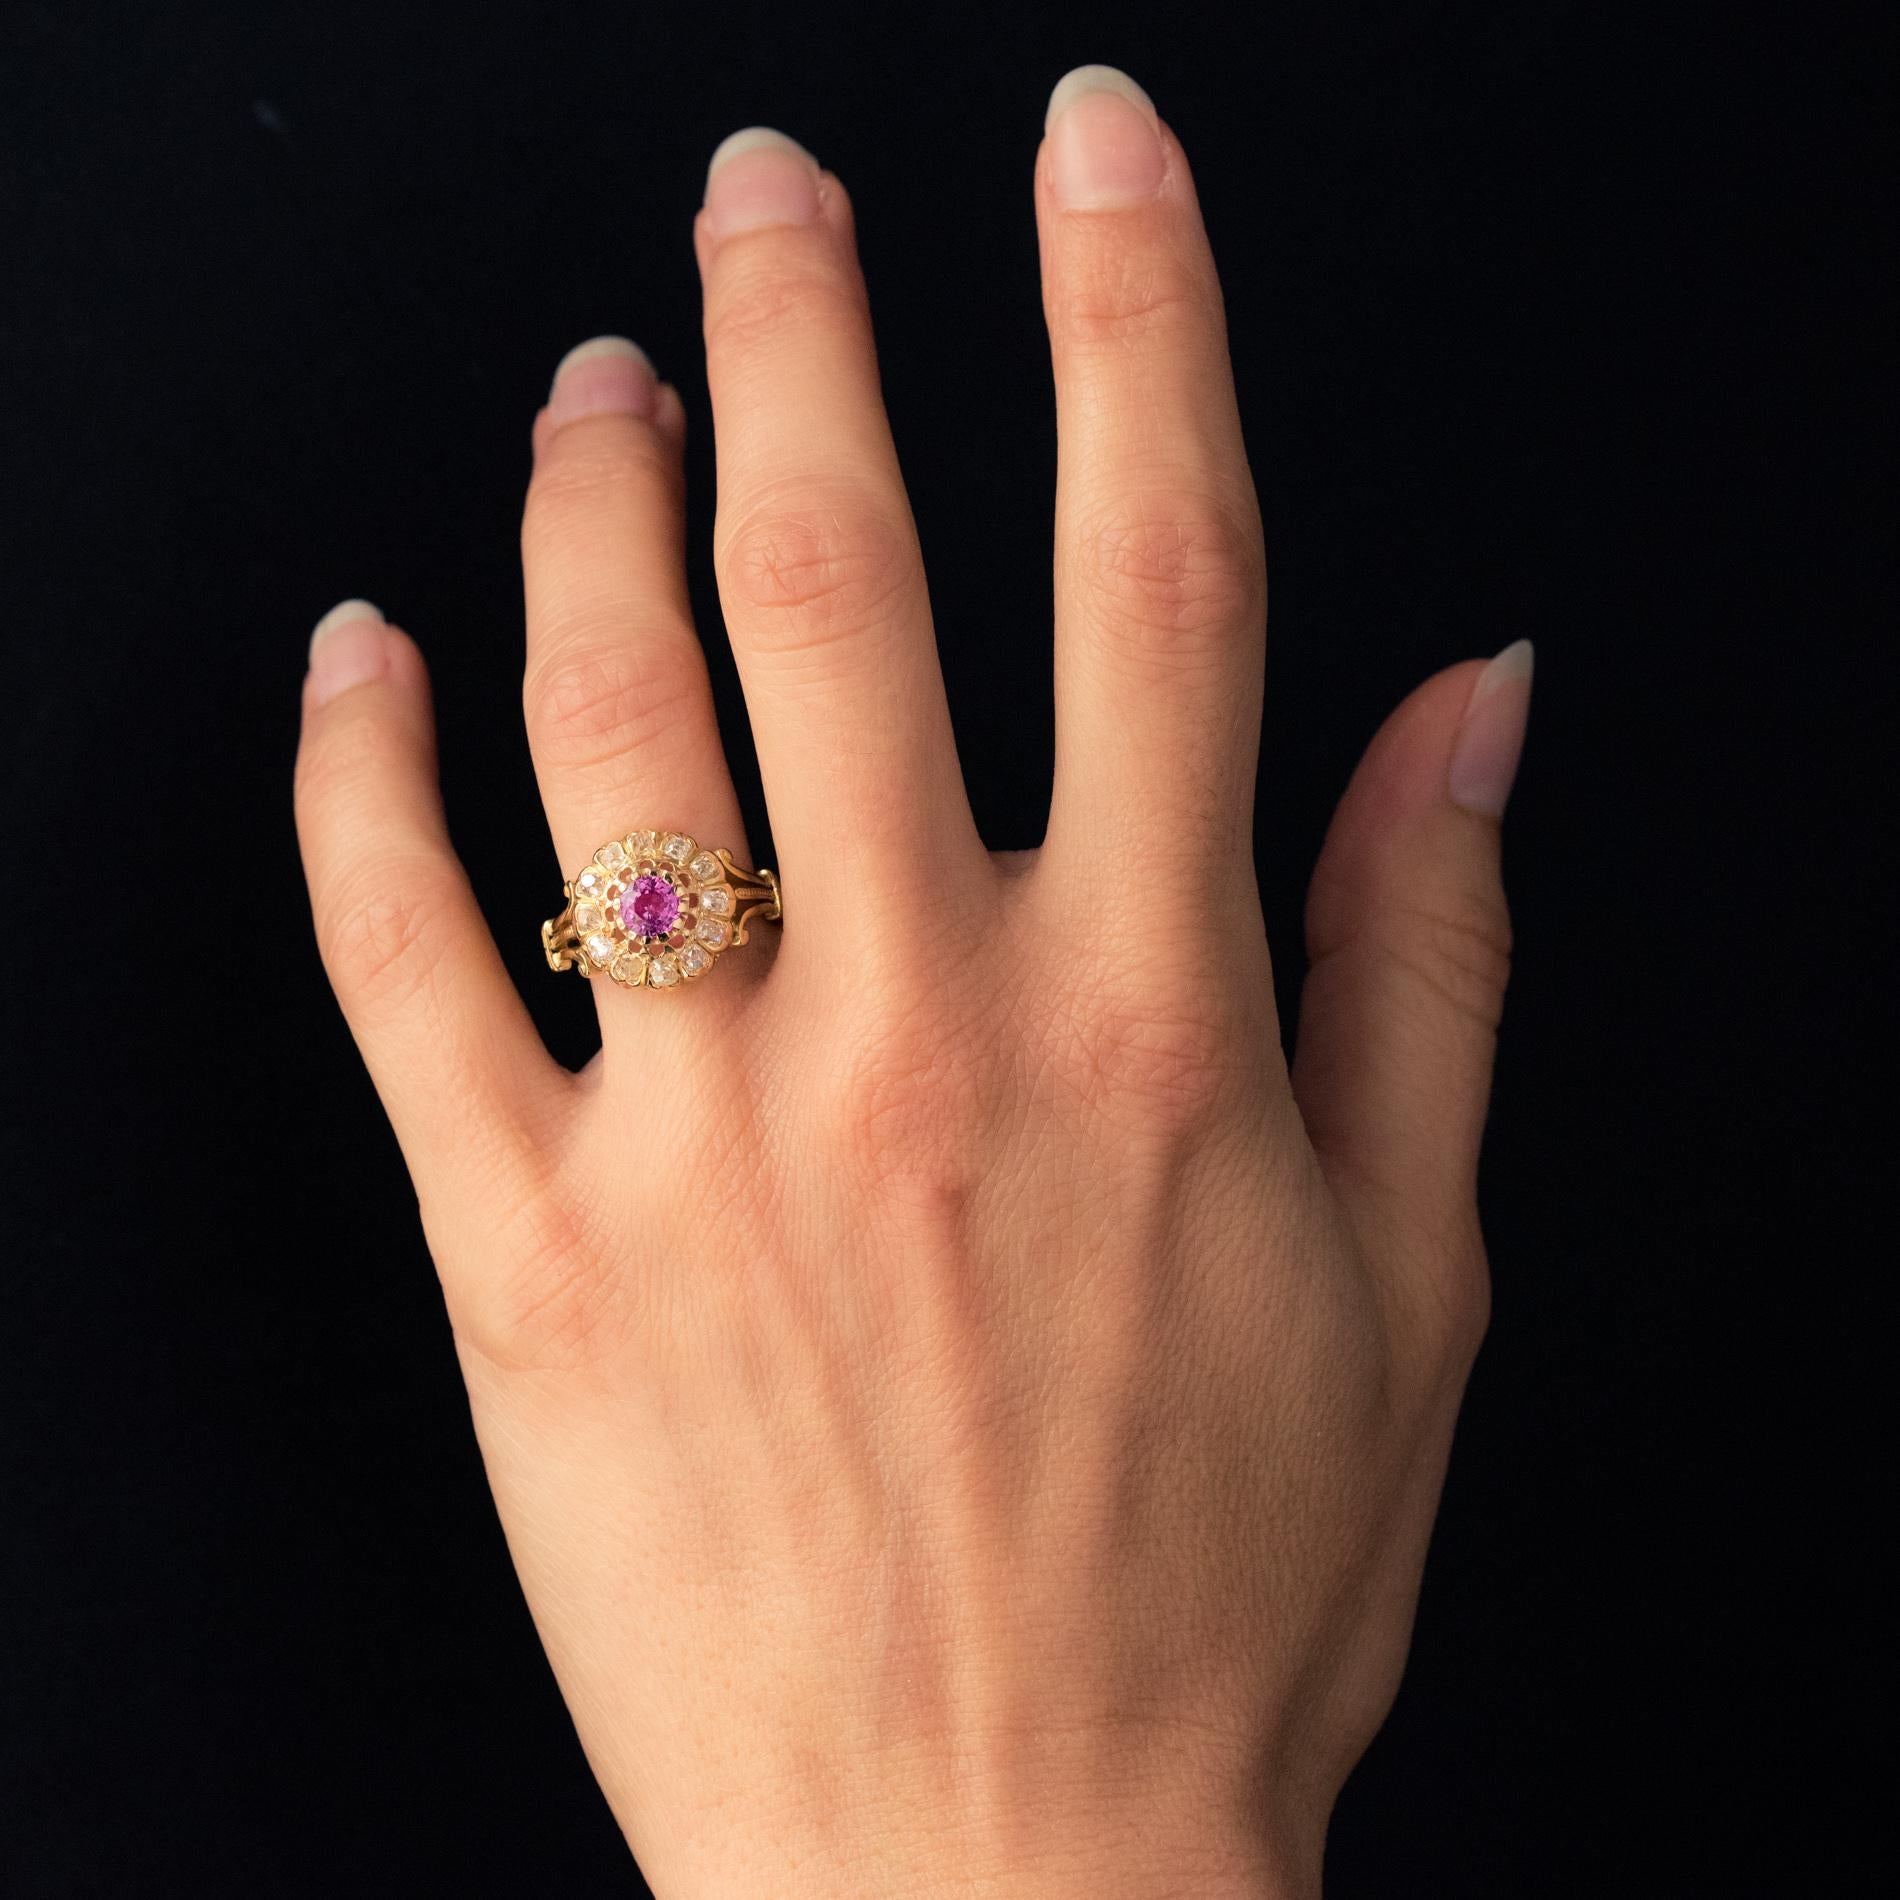 Ring in 18 karat yellow gold, horse's head hallmark.
Round shaped, this daisy ring is claw-set with a pink sapphire, surrounded by antique cushion-cut diamonds. On either side, the start of the ring forms an openwork fleur-de-lis.
Height : 13.8 mm,